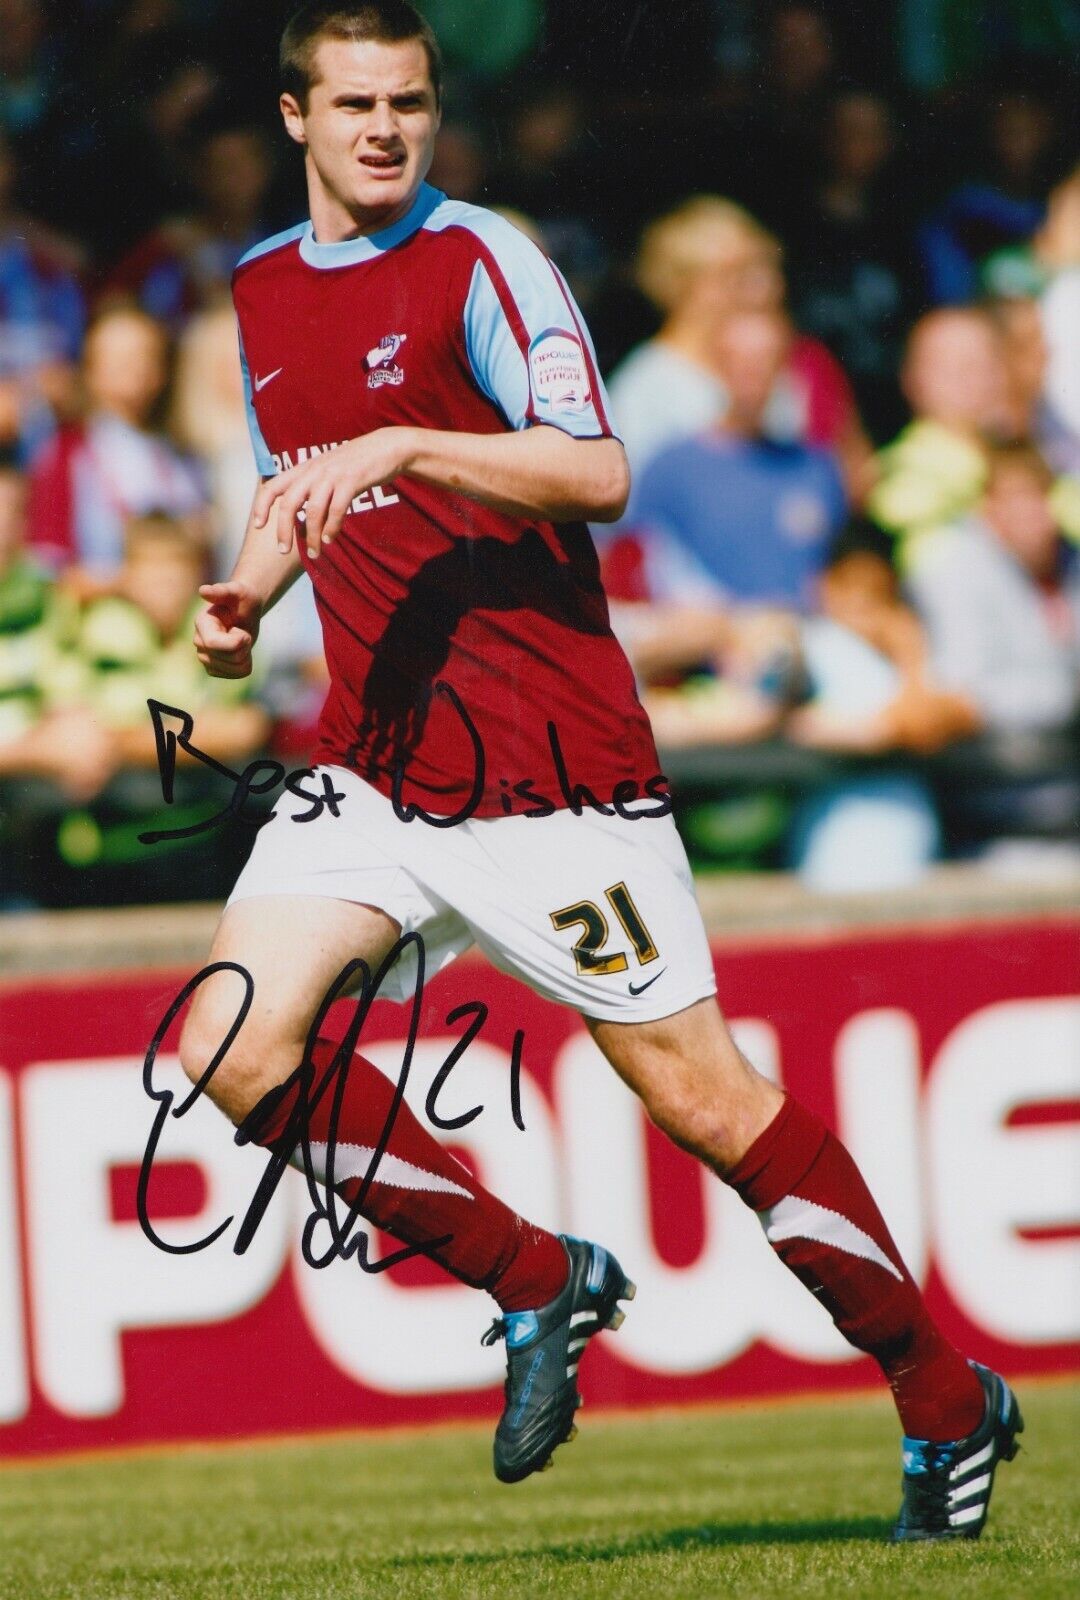 Eddie Nolan Hand Signed 12x8 Photo Poster painting - Scunthorpe United Autograph.